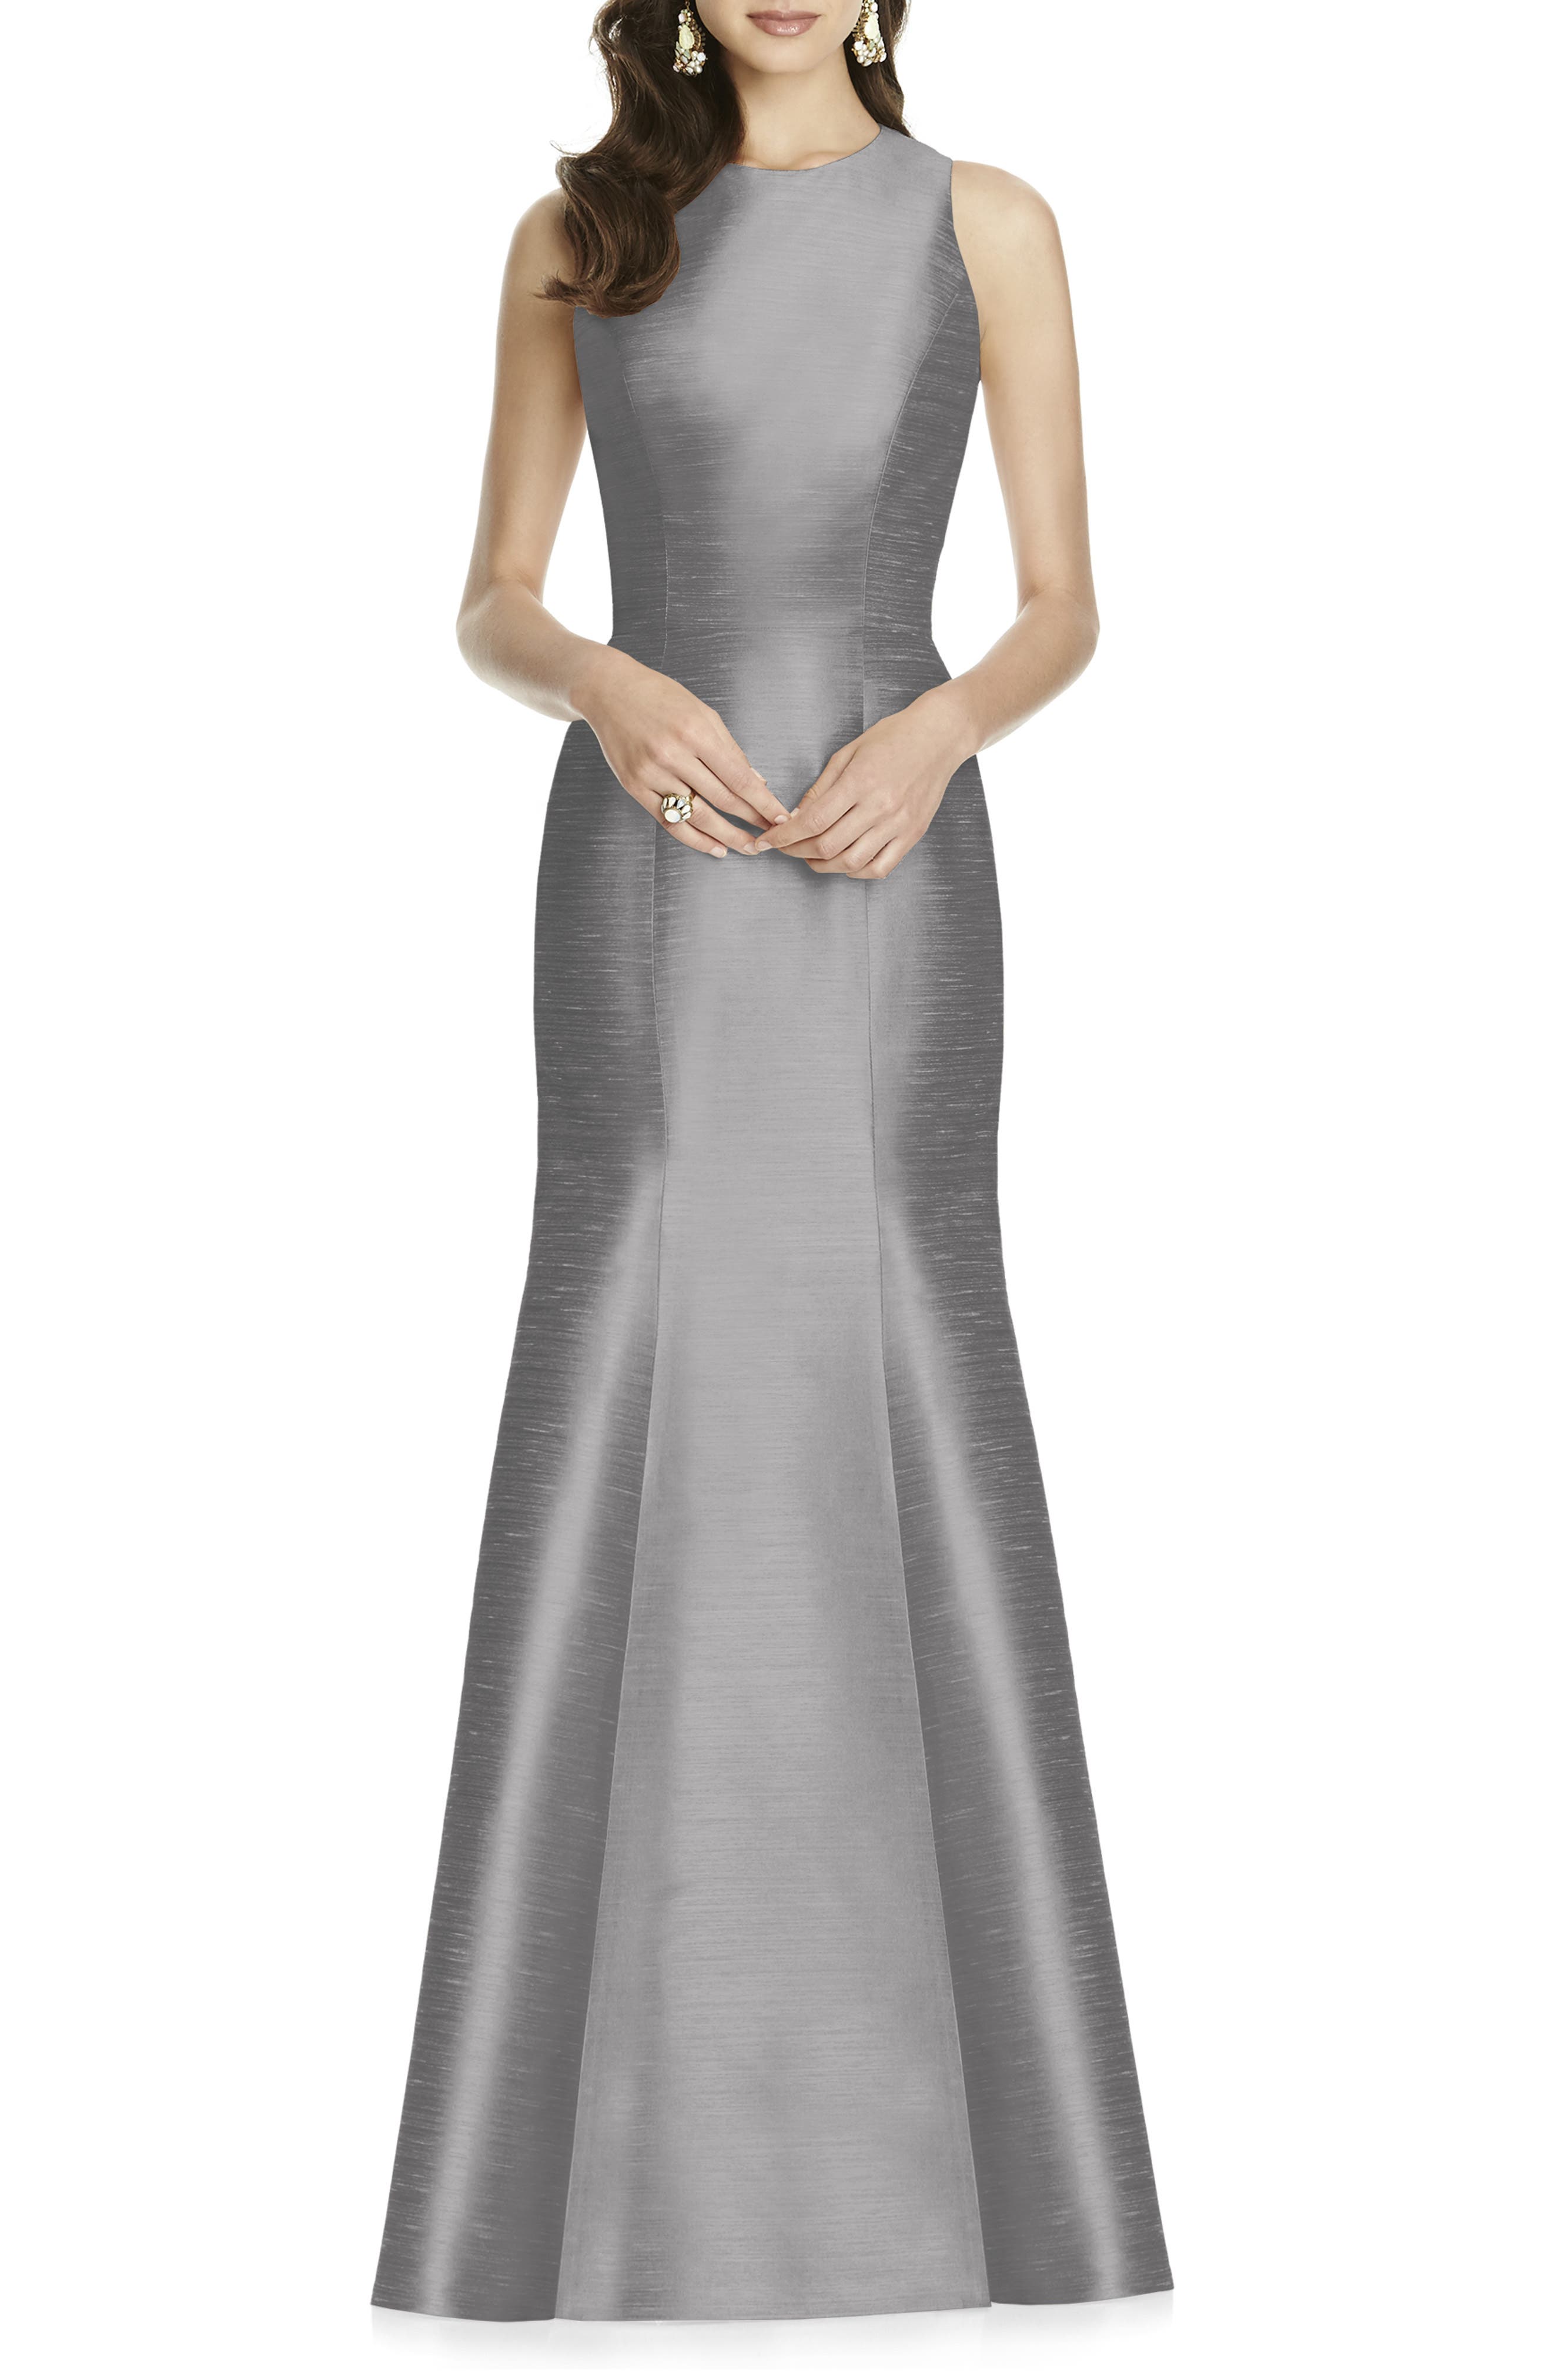 silver themed party dress